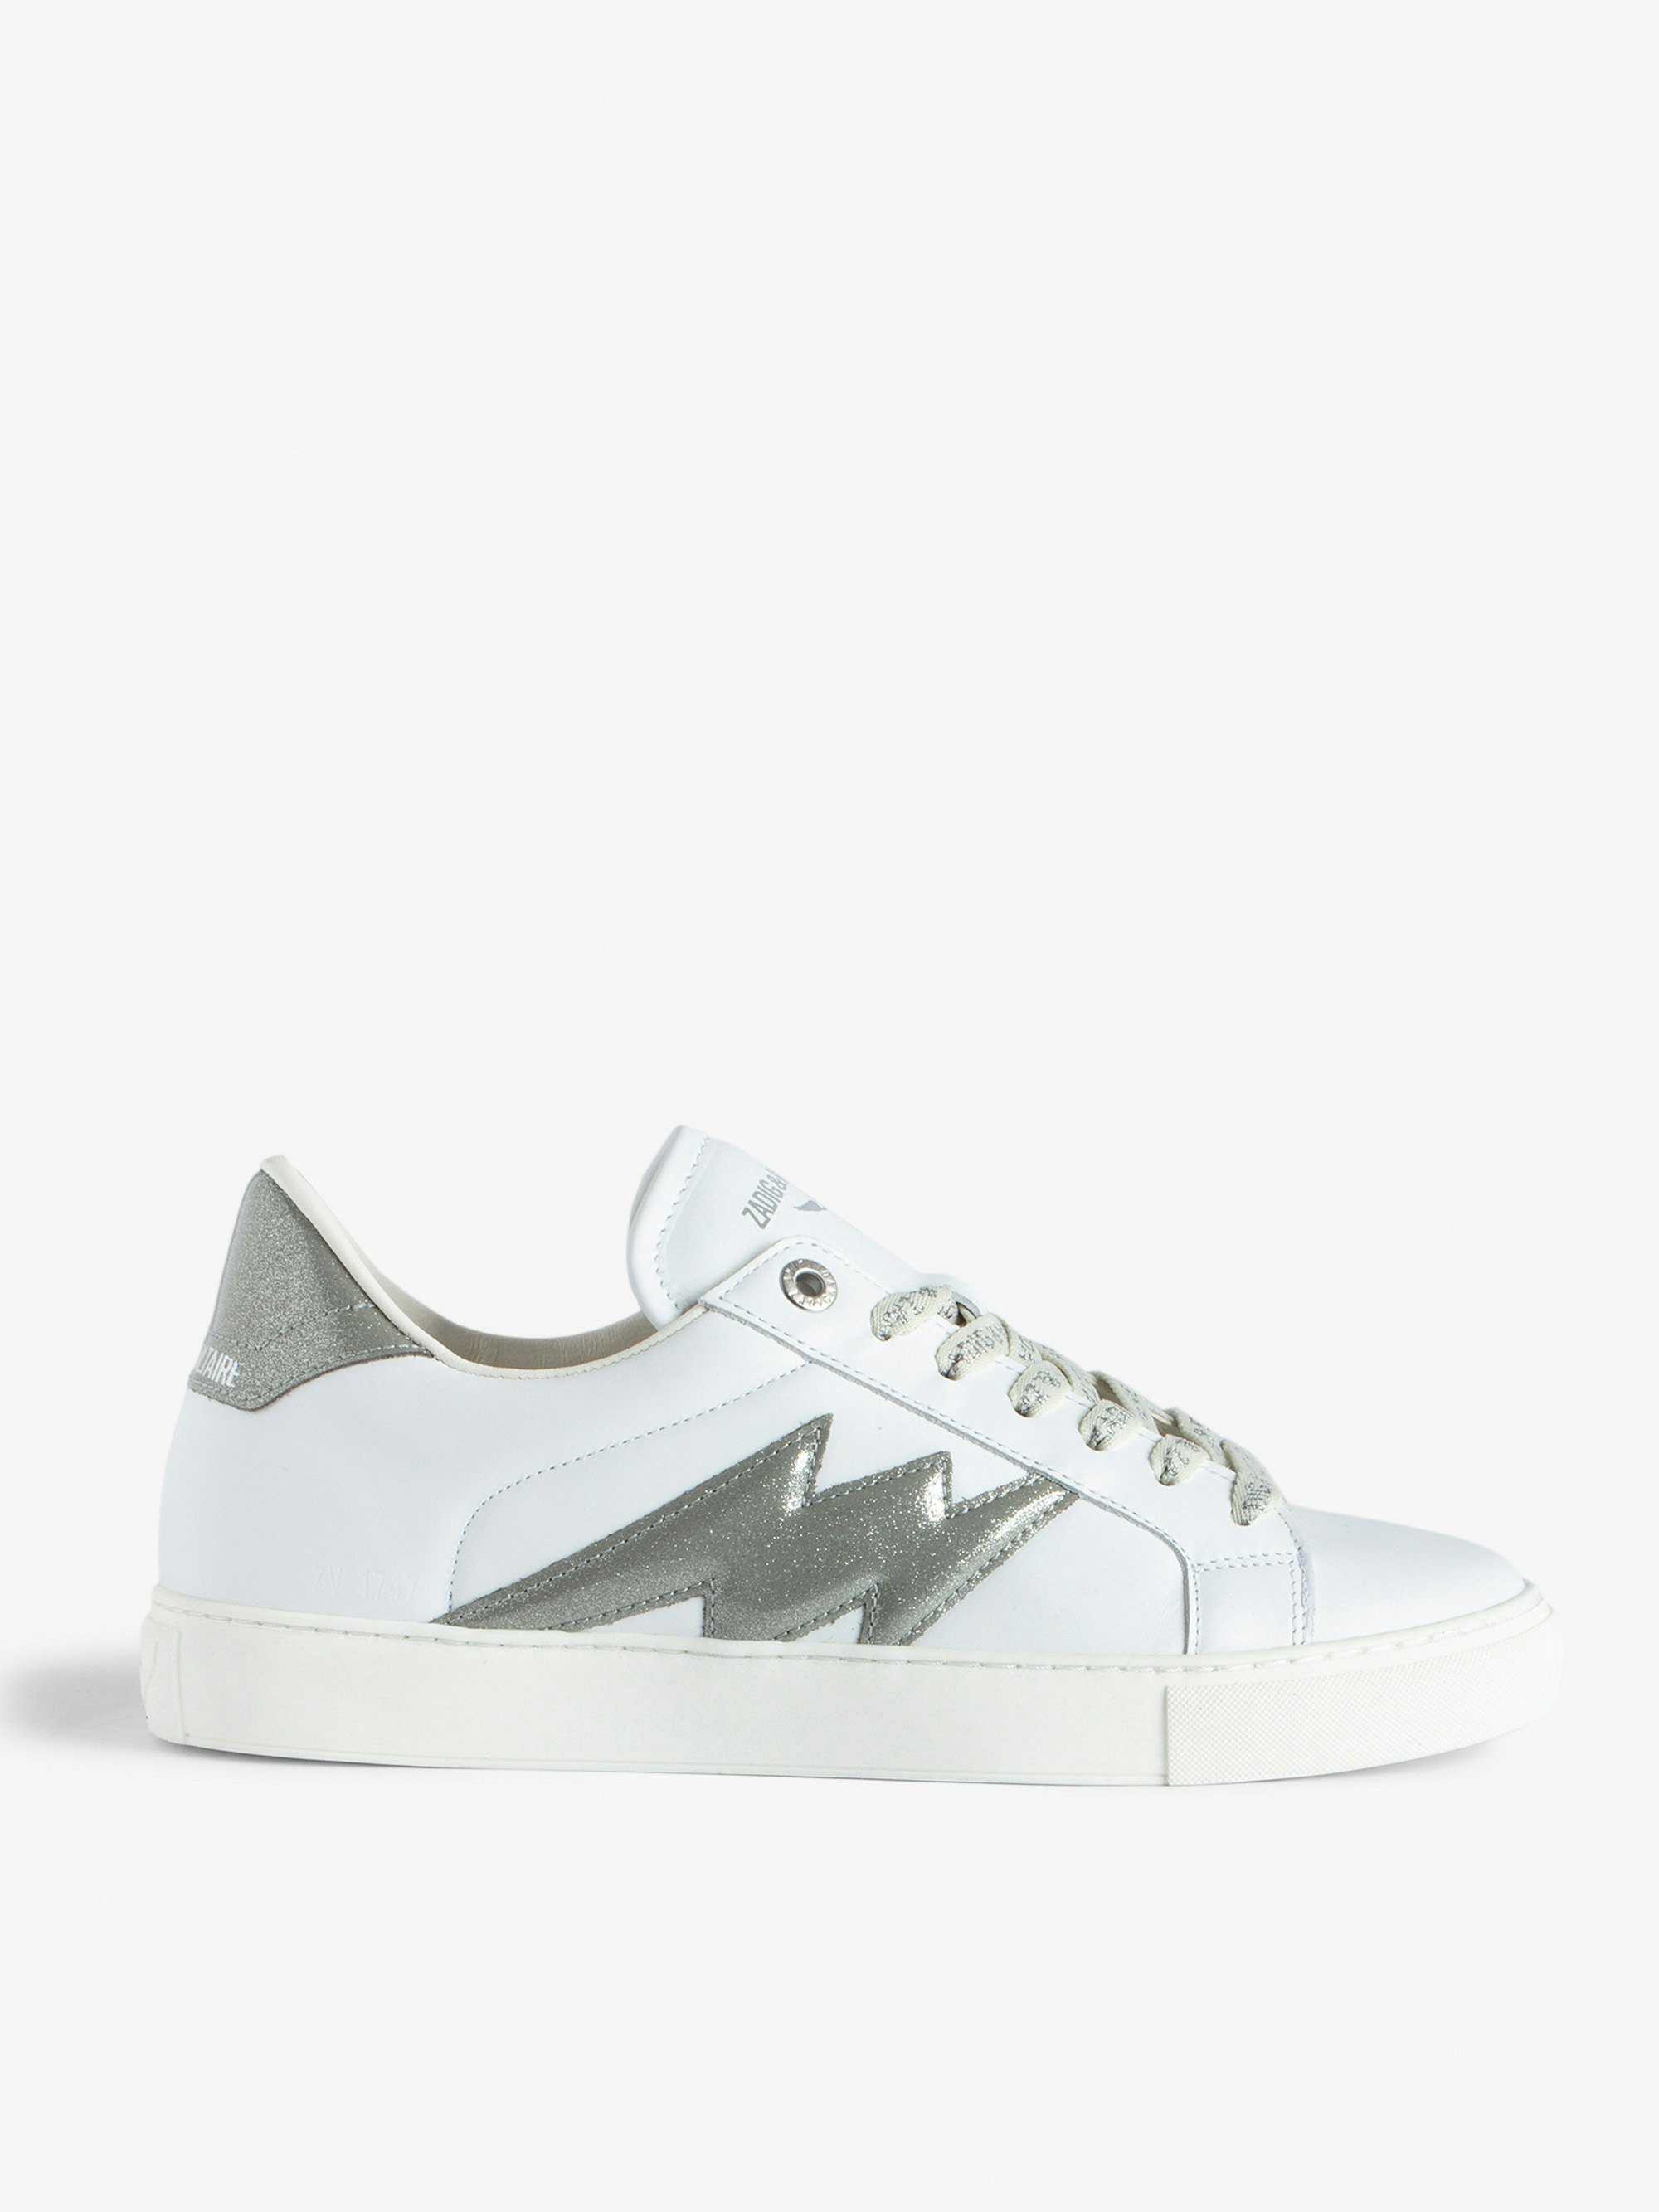 ZV1747 La Flash Low-Top  Infinity Patent Trainers - White smooth leather low-top trainers with lightning bolt panels and silver glitter reinforcement.